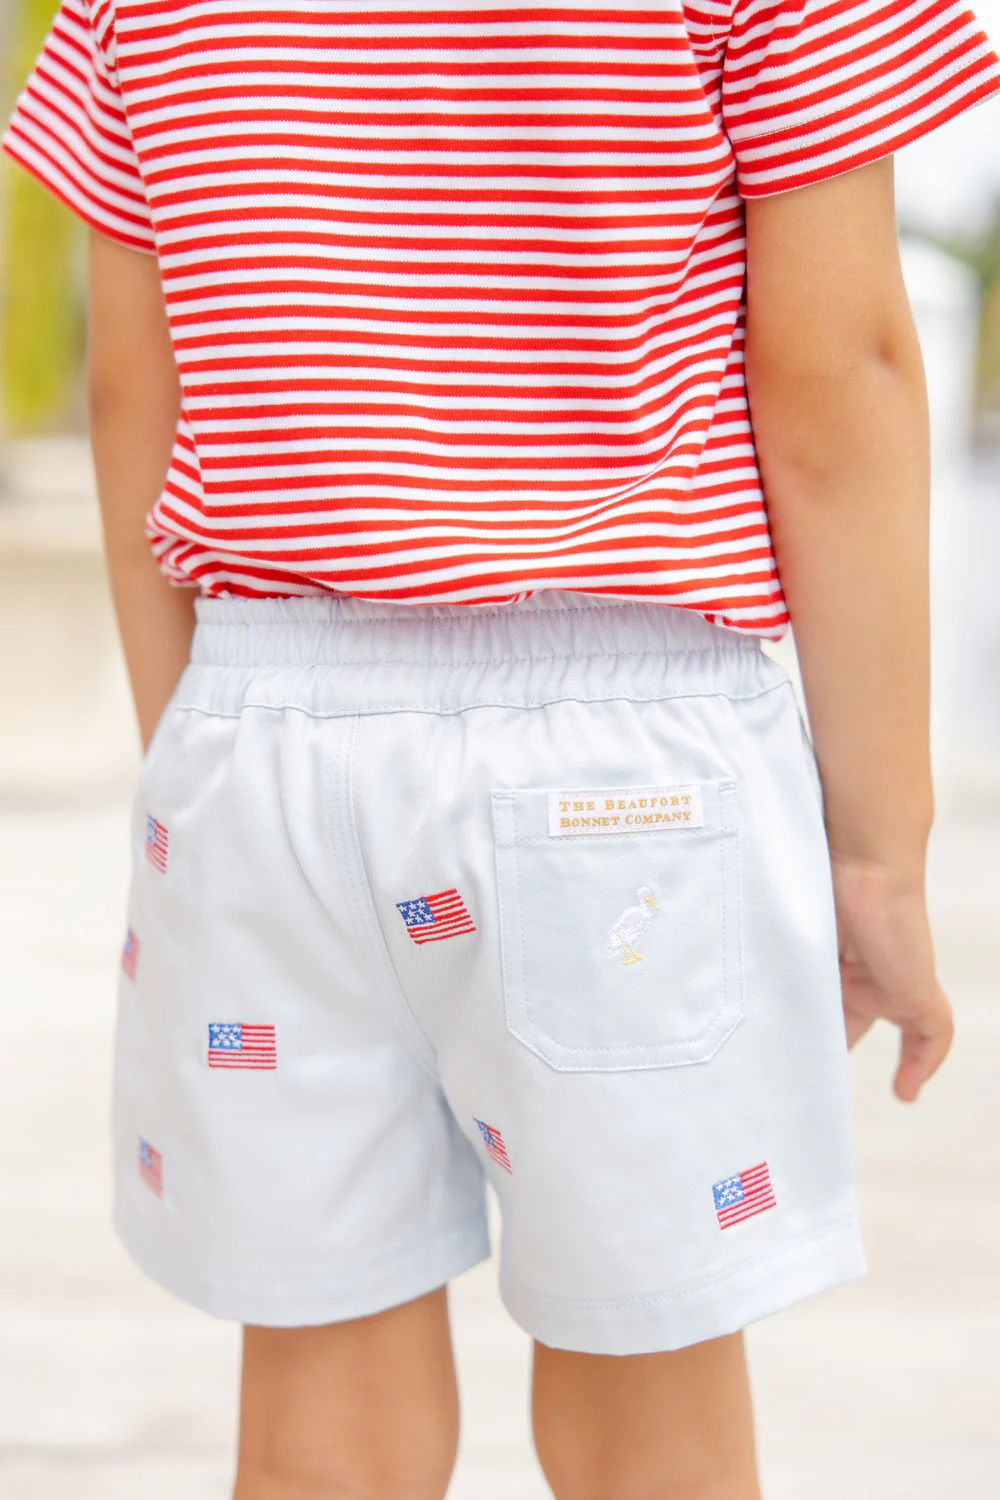 Critter Sheffield Shorts - Buckhead Blue & American Flag Embroidery with Multicolor Stork | The Beaufort Bonnet Company